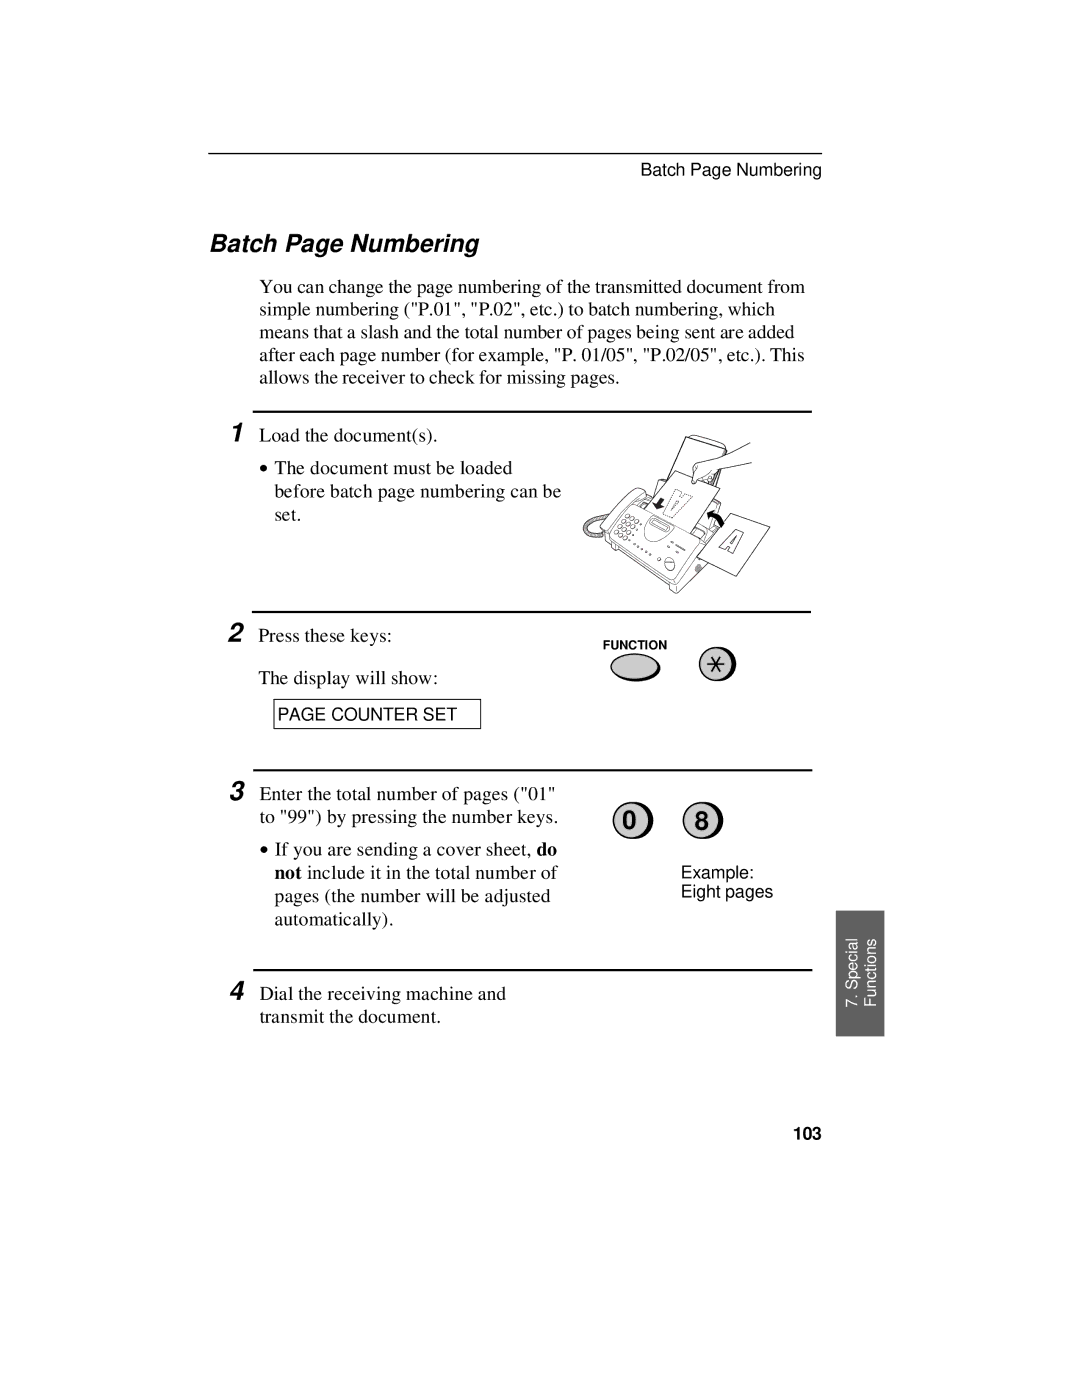 Sharp UX-470 operation manual Batch Page Numbering, 103 